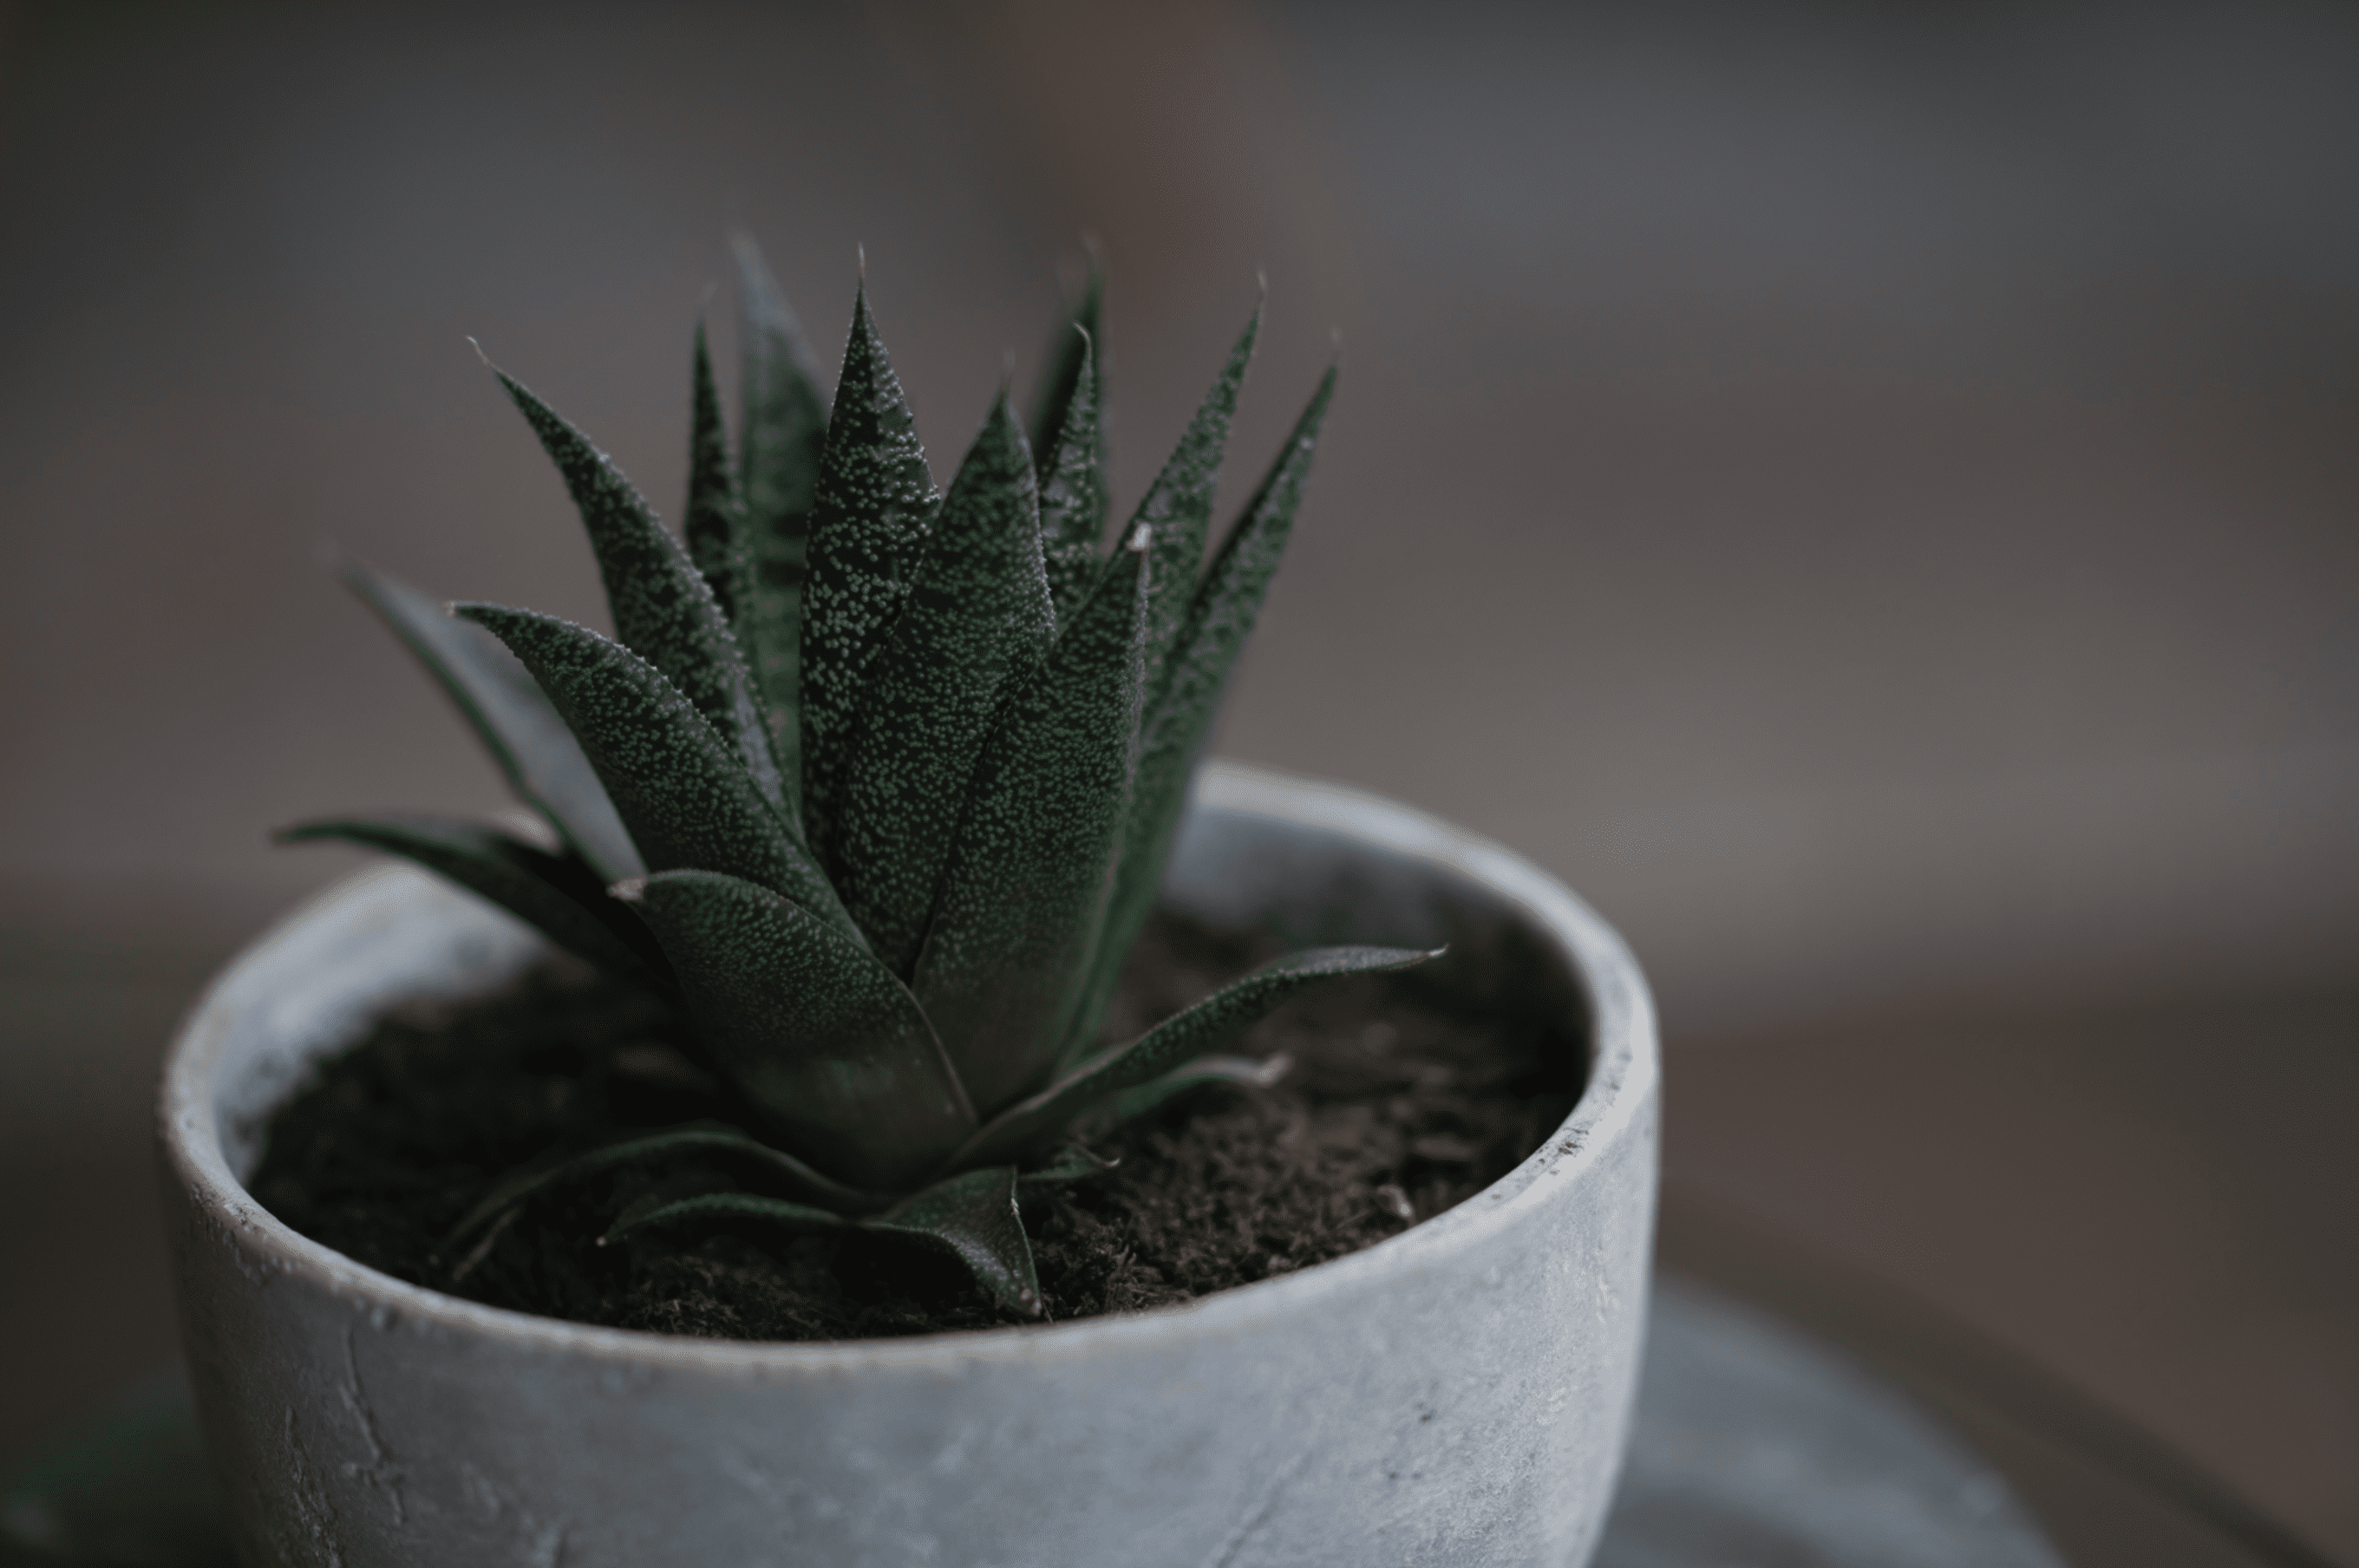 Succulent plant with pointed green leaves, covered in small white speckles, sitting in a round, concrete pot on a blurred background, symbolizing the importance of consistency in nurturing and growth.